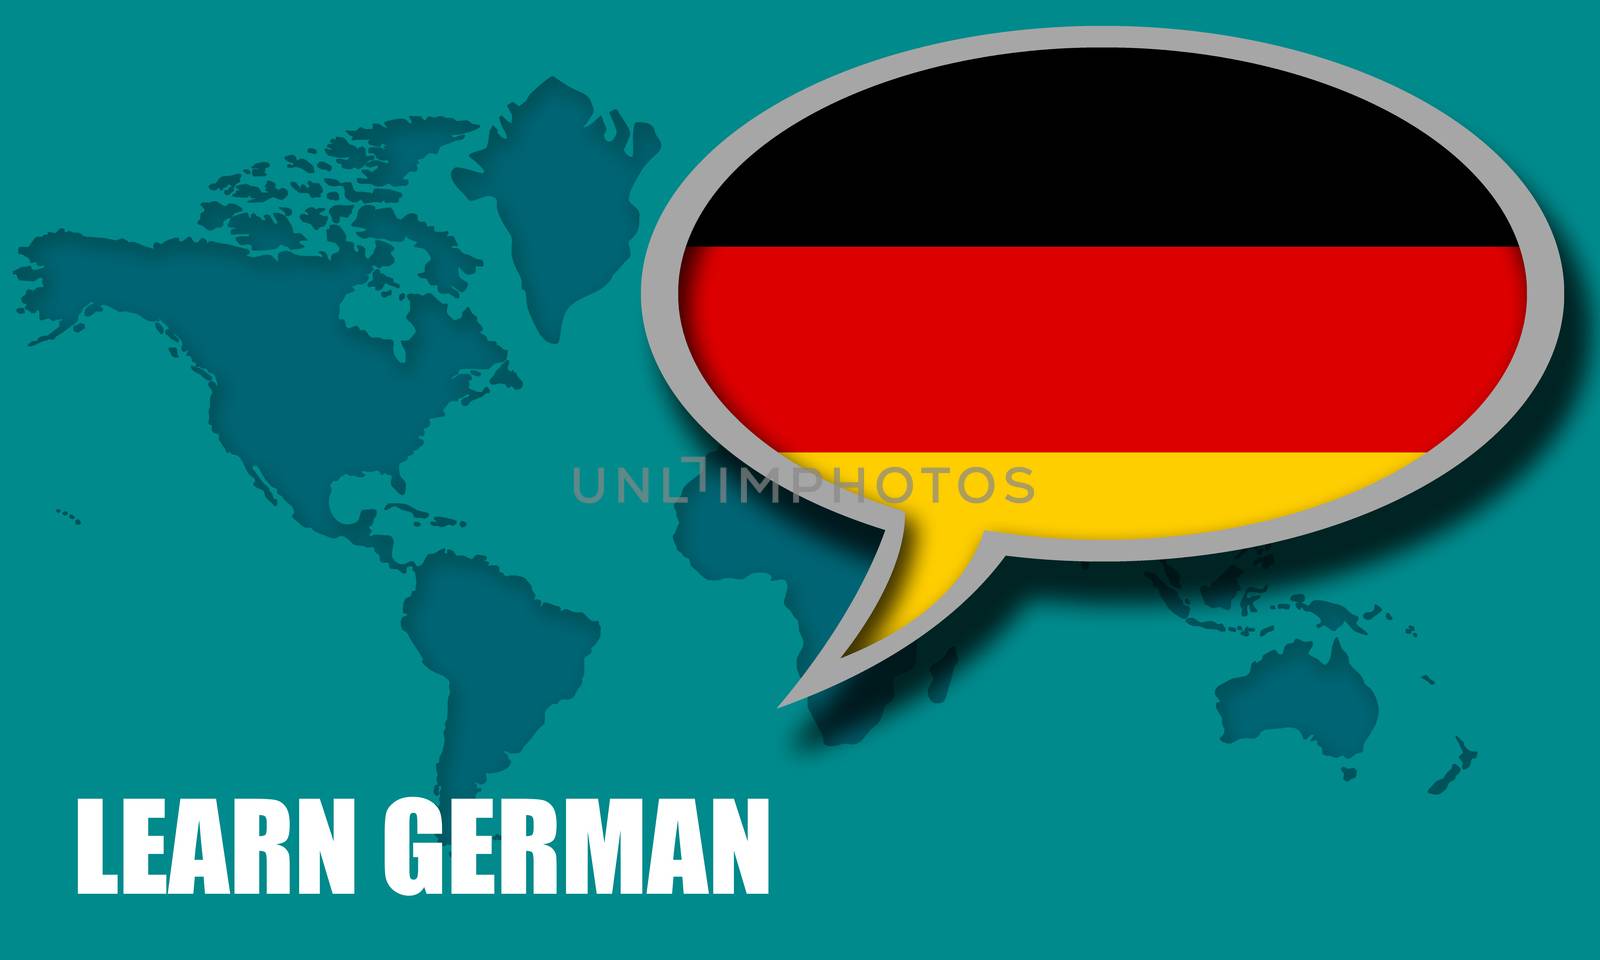 Learn German language speak bubble on red backround by tang90246